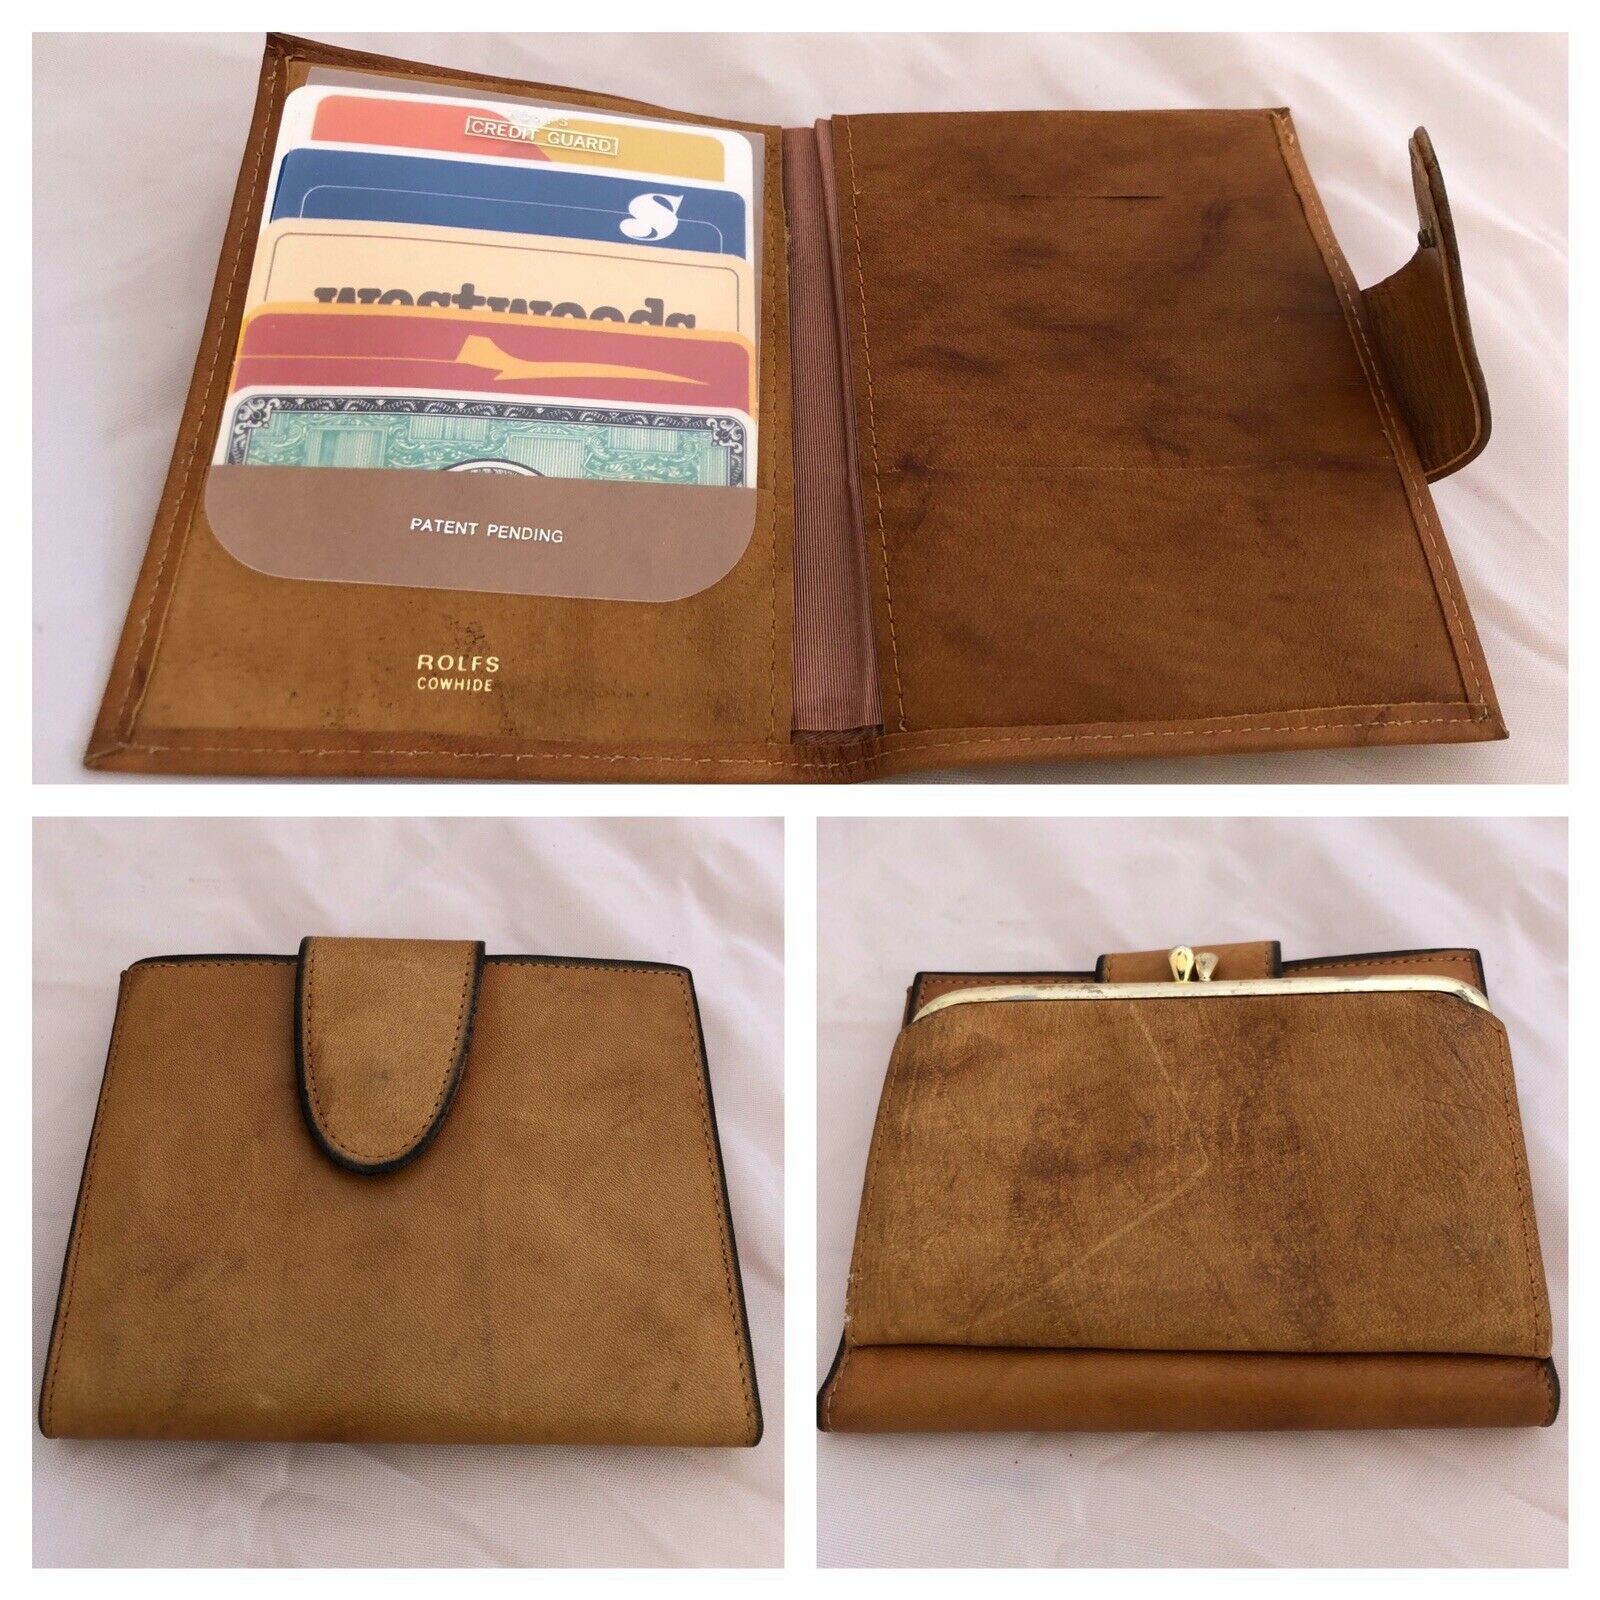 Vintage 80s Rolfs Honey Brown Leather Cowhide Bifold Coin Purse Wallet 4 X 5.25"